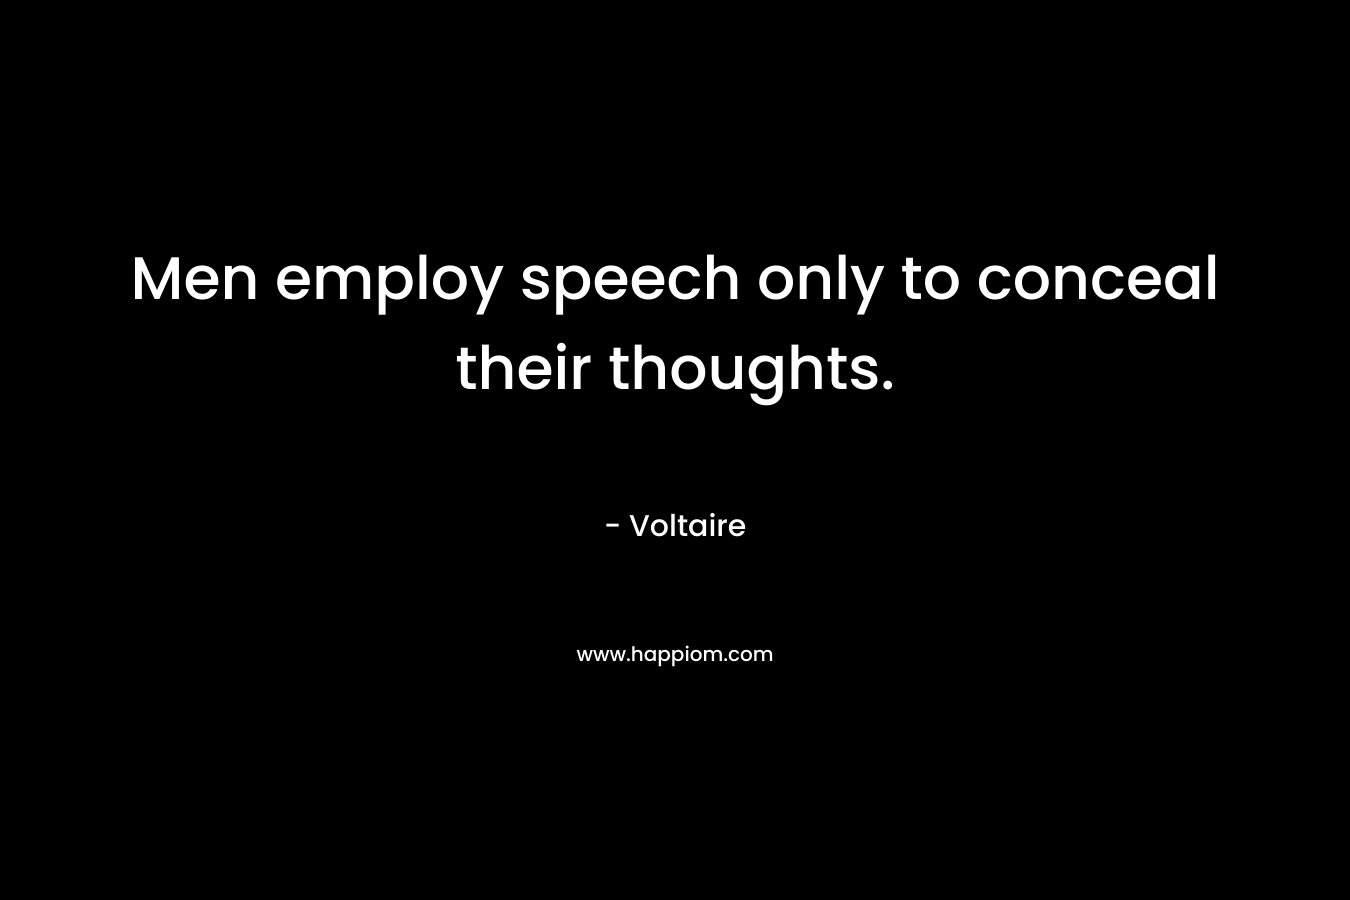 Men employ speech only to conceal their thoughts.